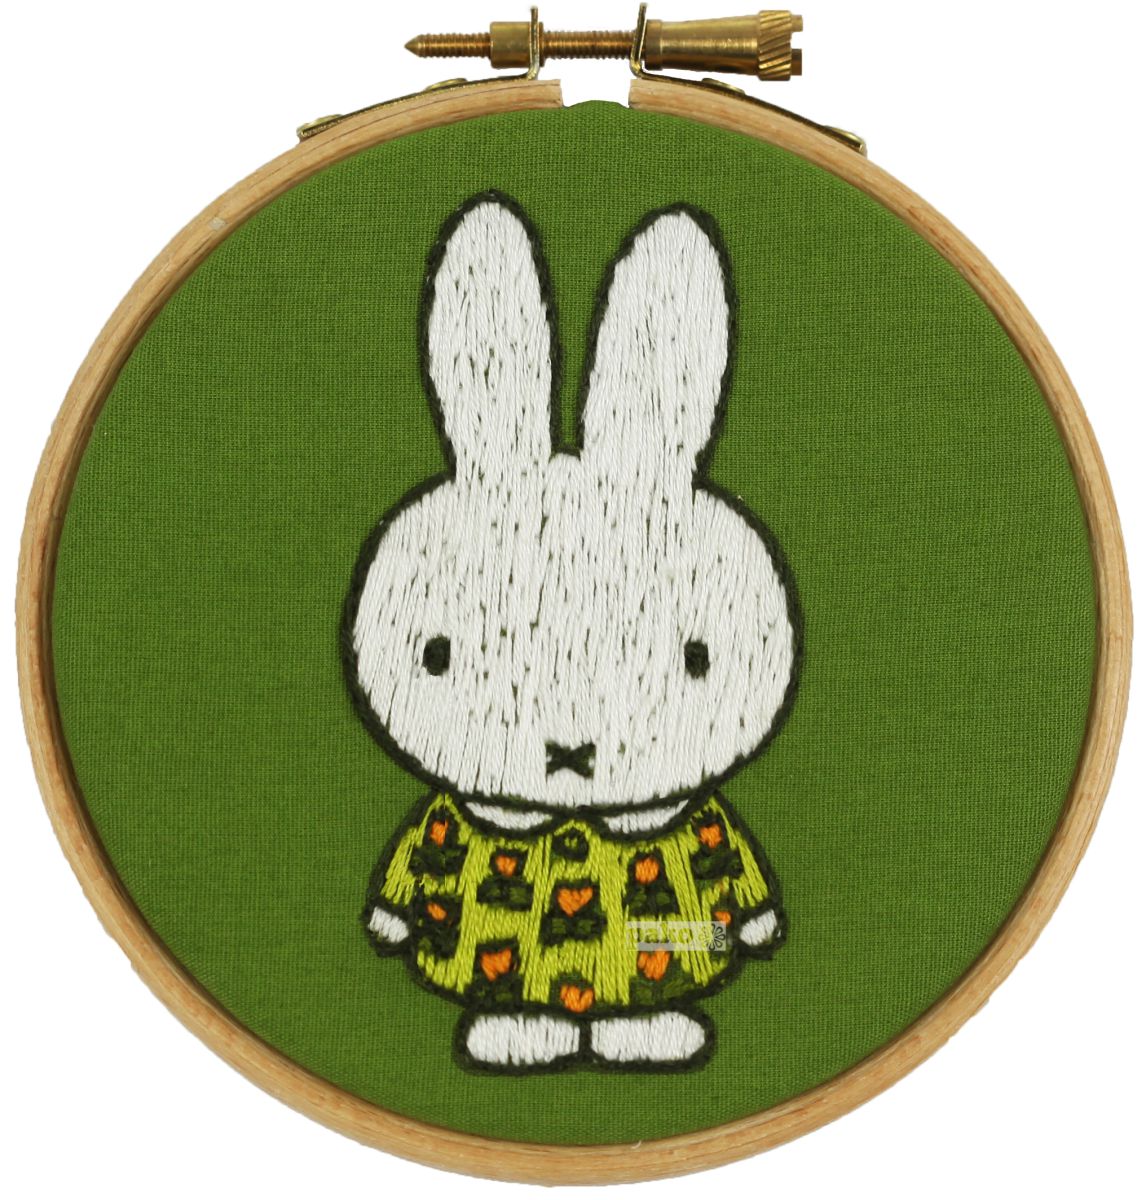 printed embroidery kit miffy dress with tulips dick bruna